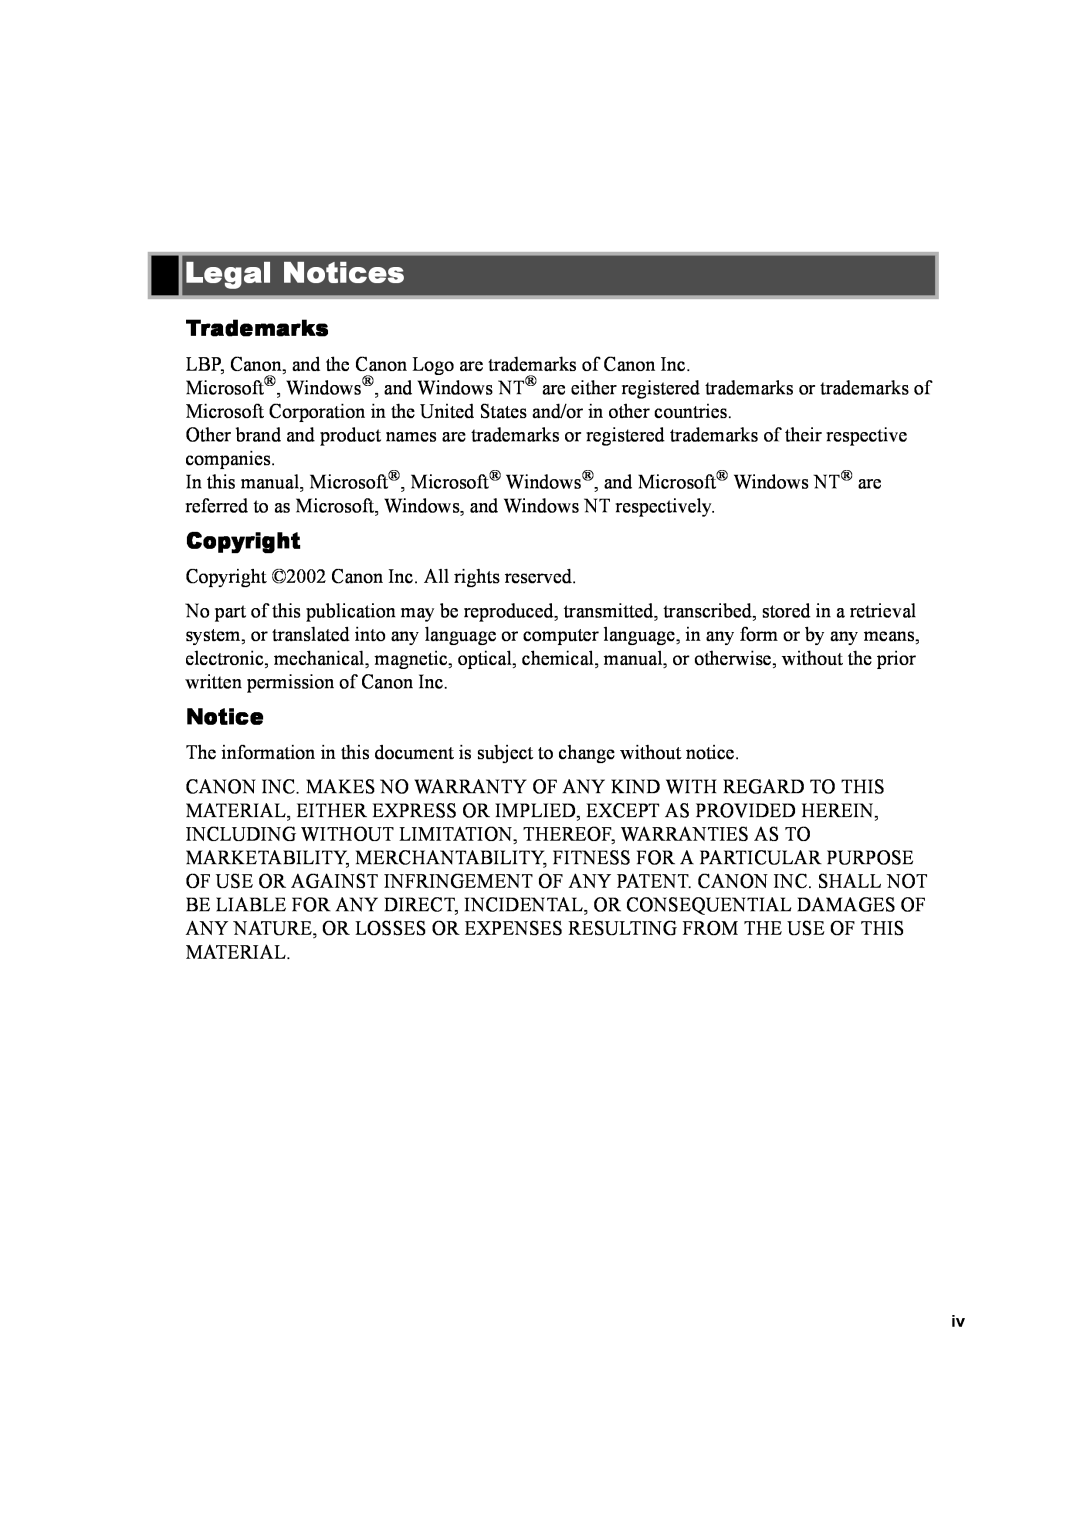 Canon D600 manual Legal Notices, Trademarks, Copyright 